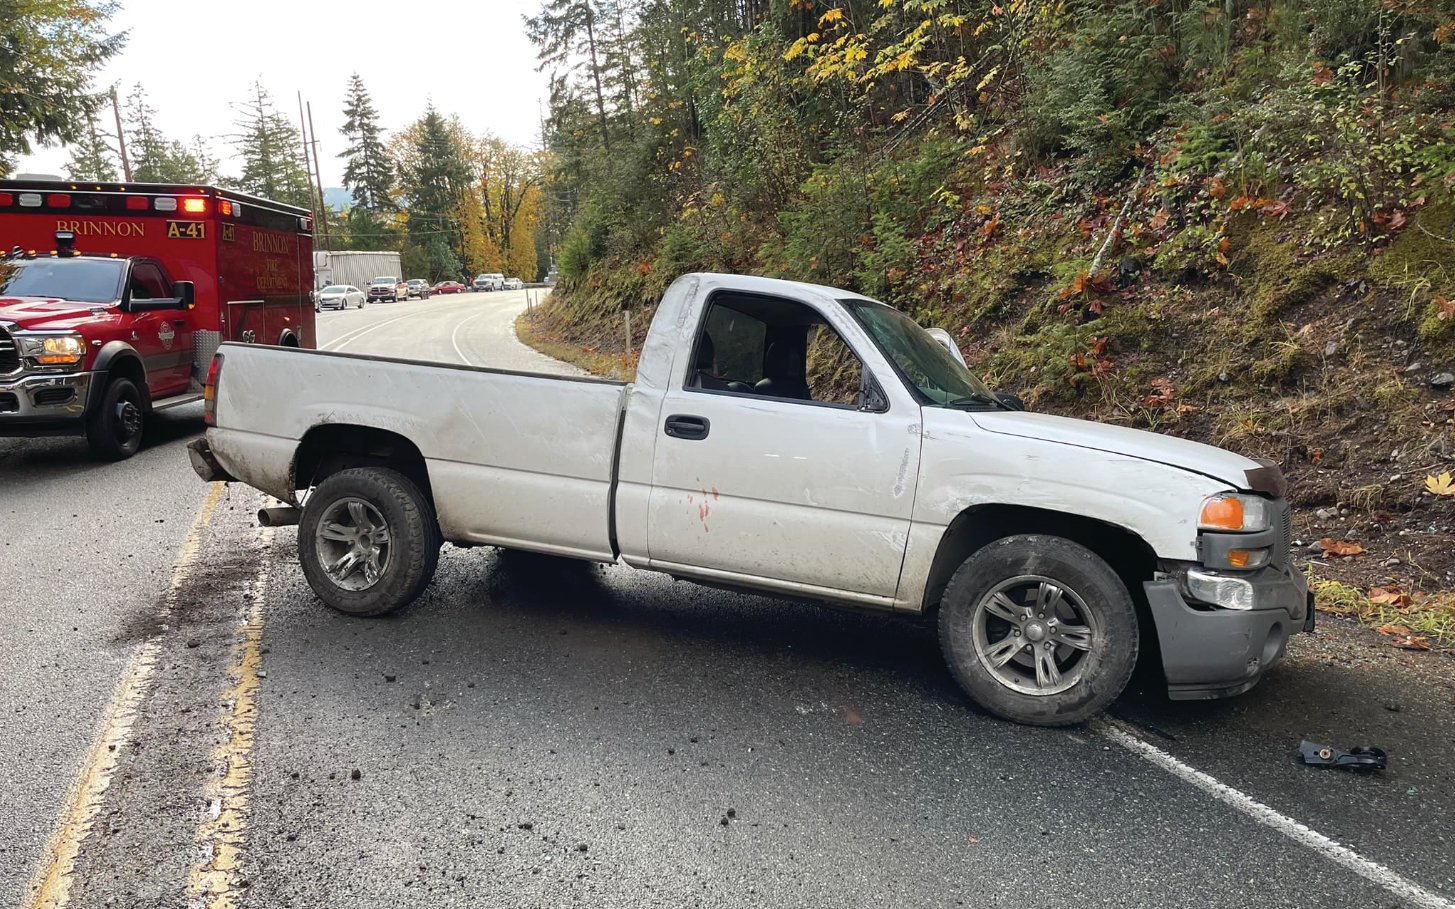 Just after 10 a.m. on Oct. 28, a pickup driver lost control of his vehicle and spun around near the US Highway 101 Milepost 302.